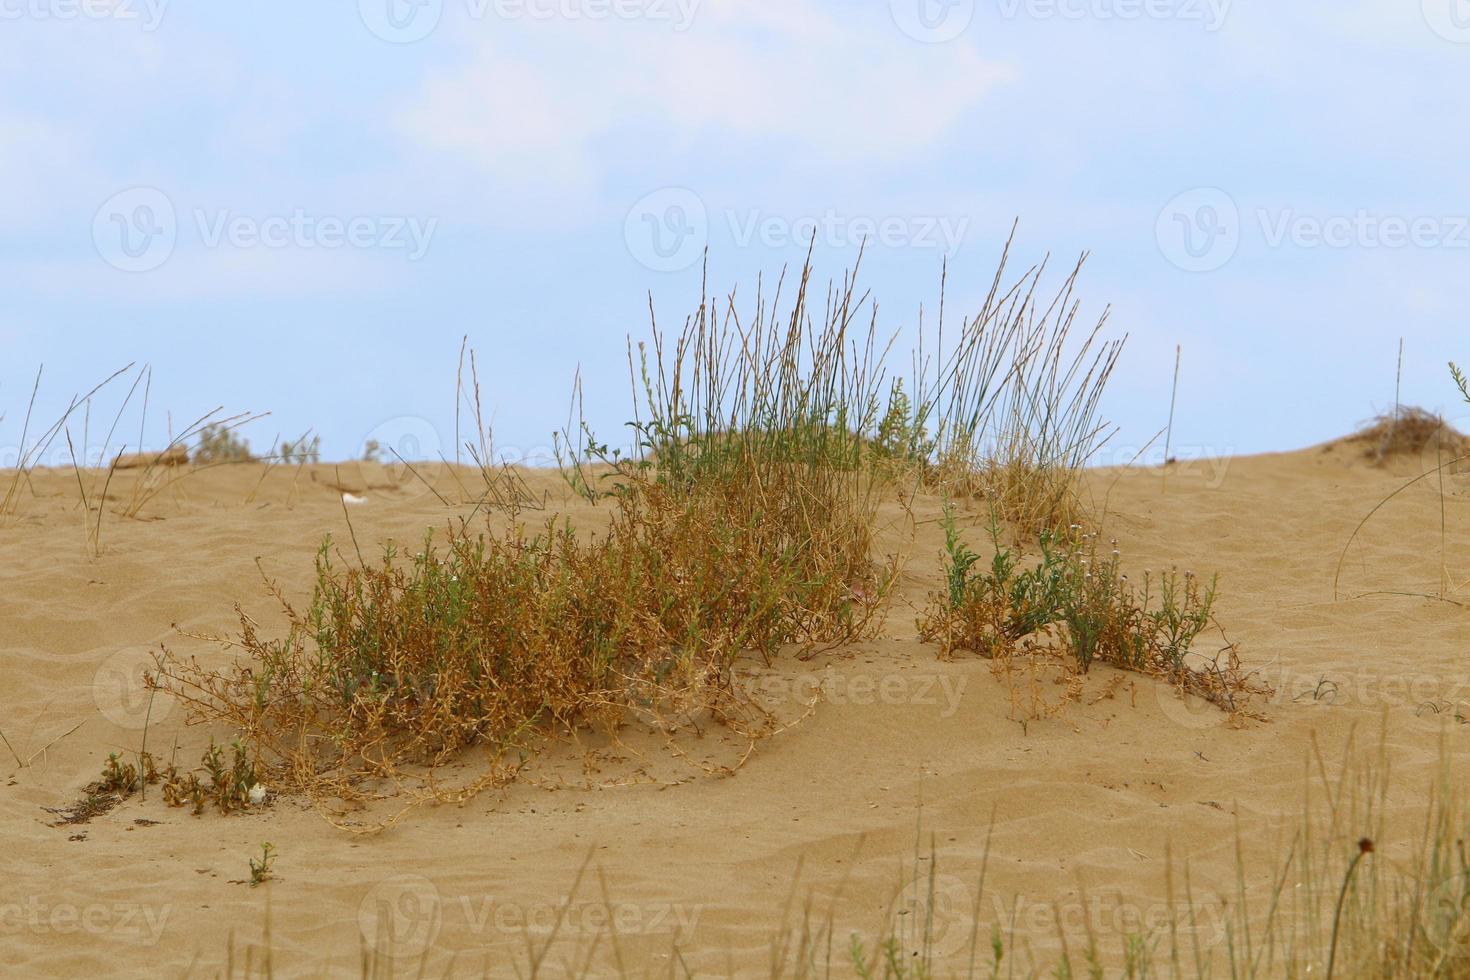 Green plants and flowers grow on the sand in the desert. photo